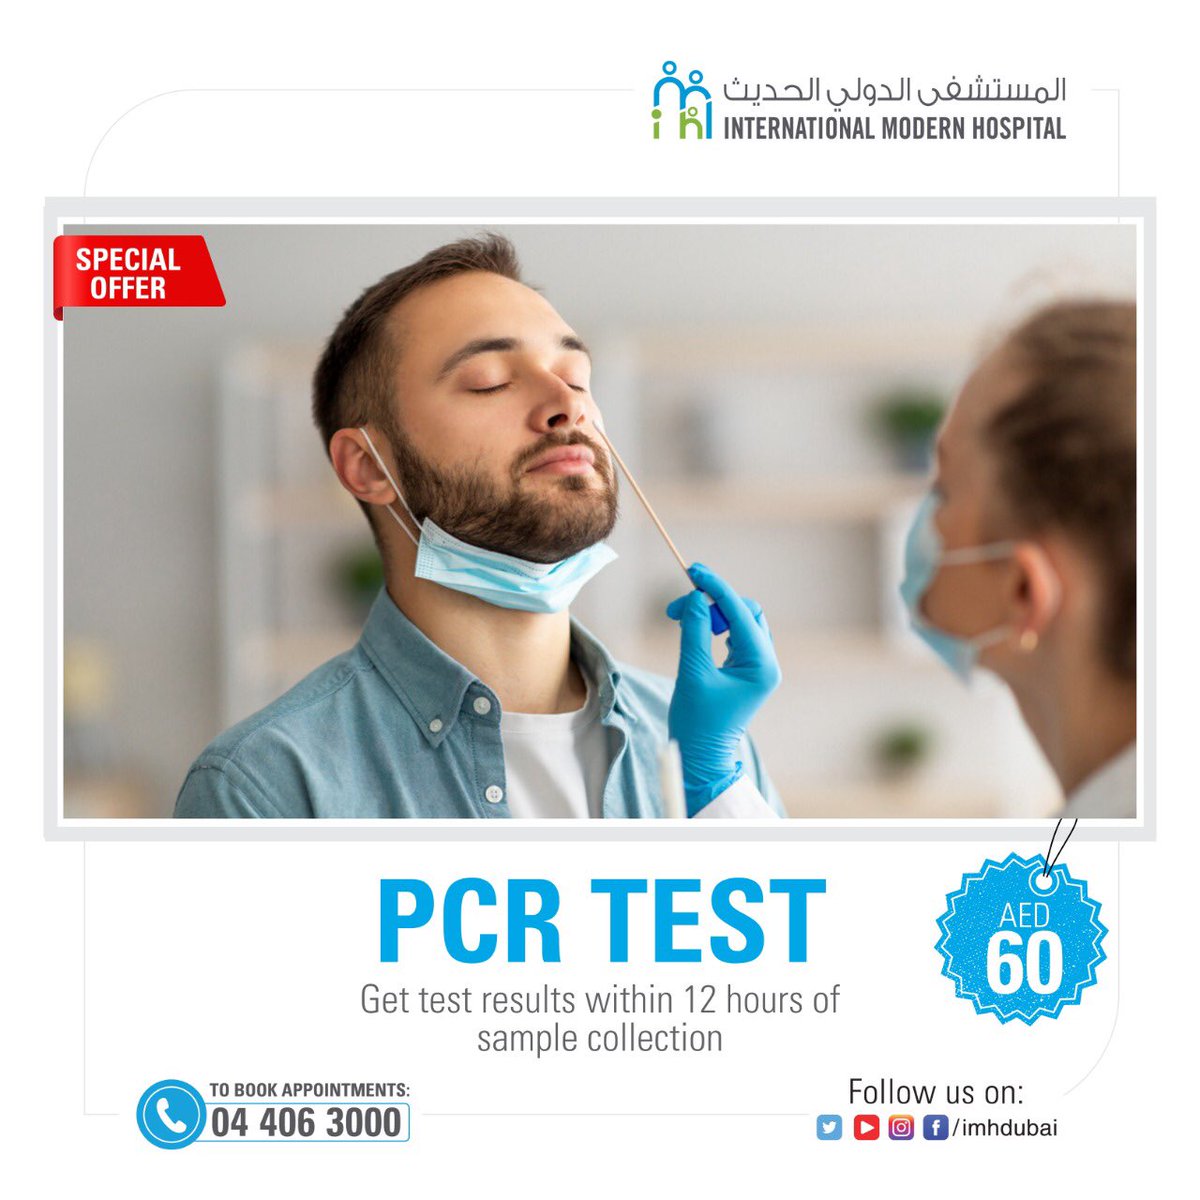 Get COVID-19 Super Express Test Results at a promotional price of AED 60. Test results will be sent within 12 hrs of sample collection. Results can be used for travel purposes. To make a booking, please call 044063000. #imhdubai #covid19 #pcrtest #pcrtestnearme #covidtest